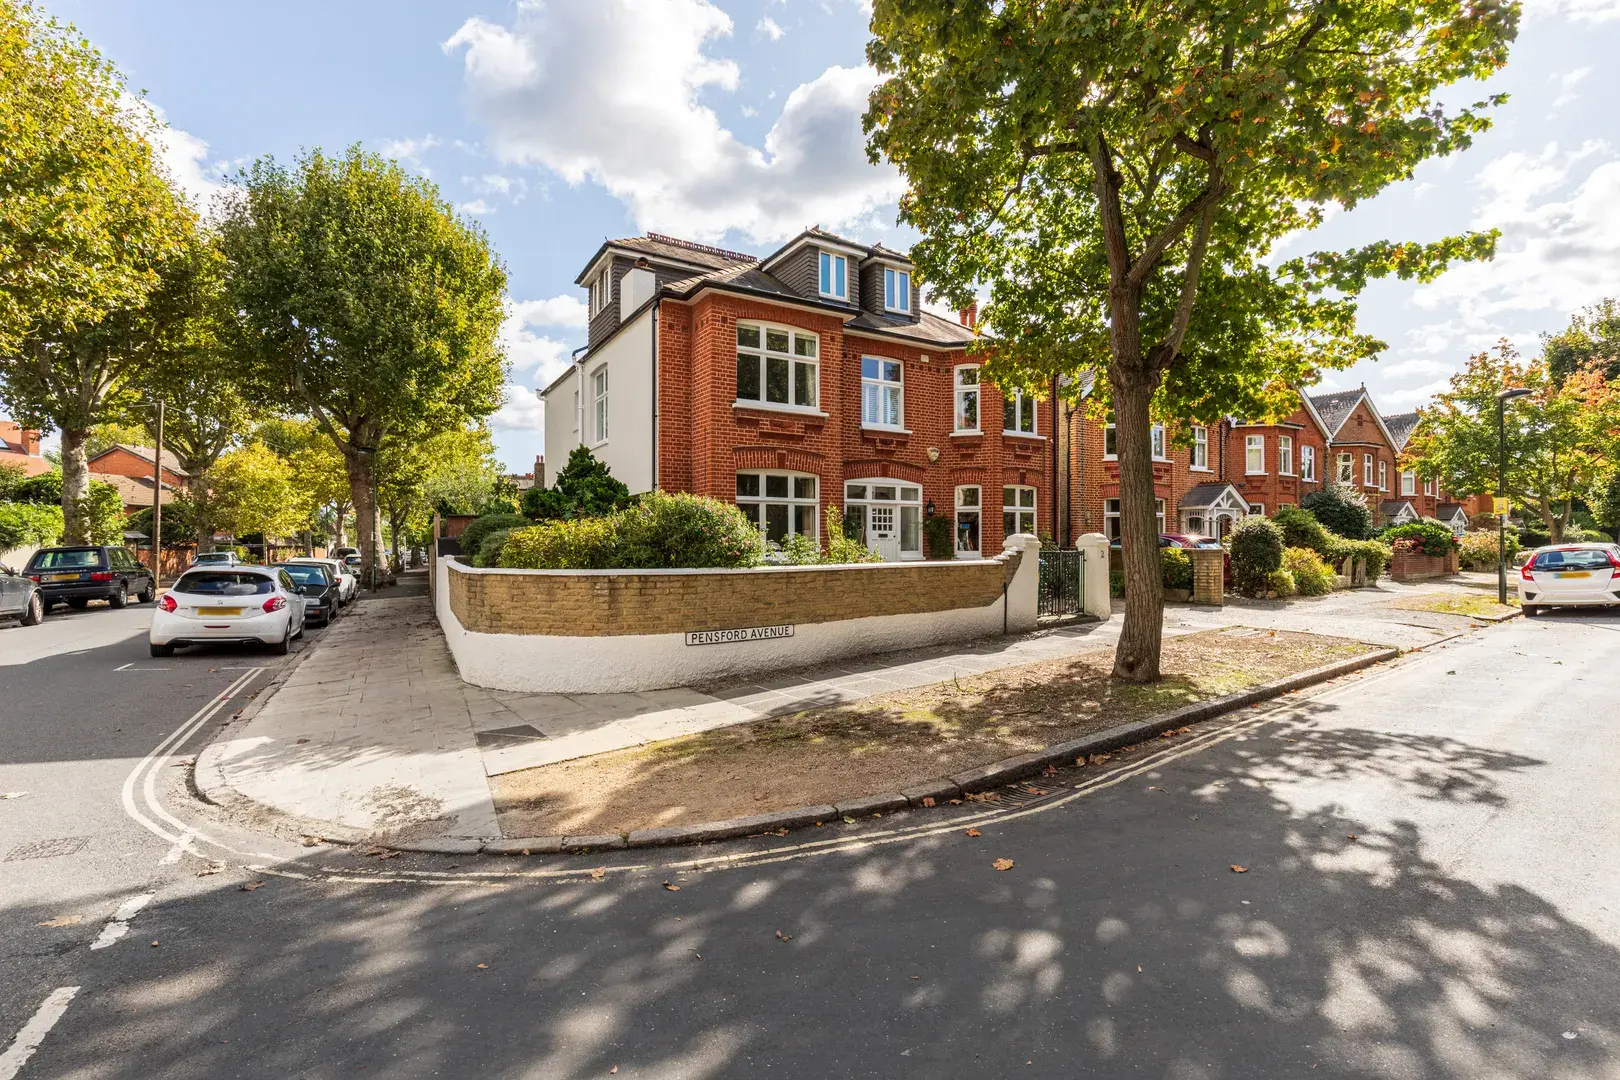 Pensford Avenue, holiday home in Kew, London